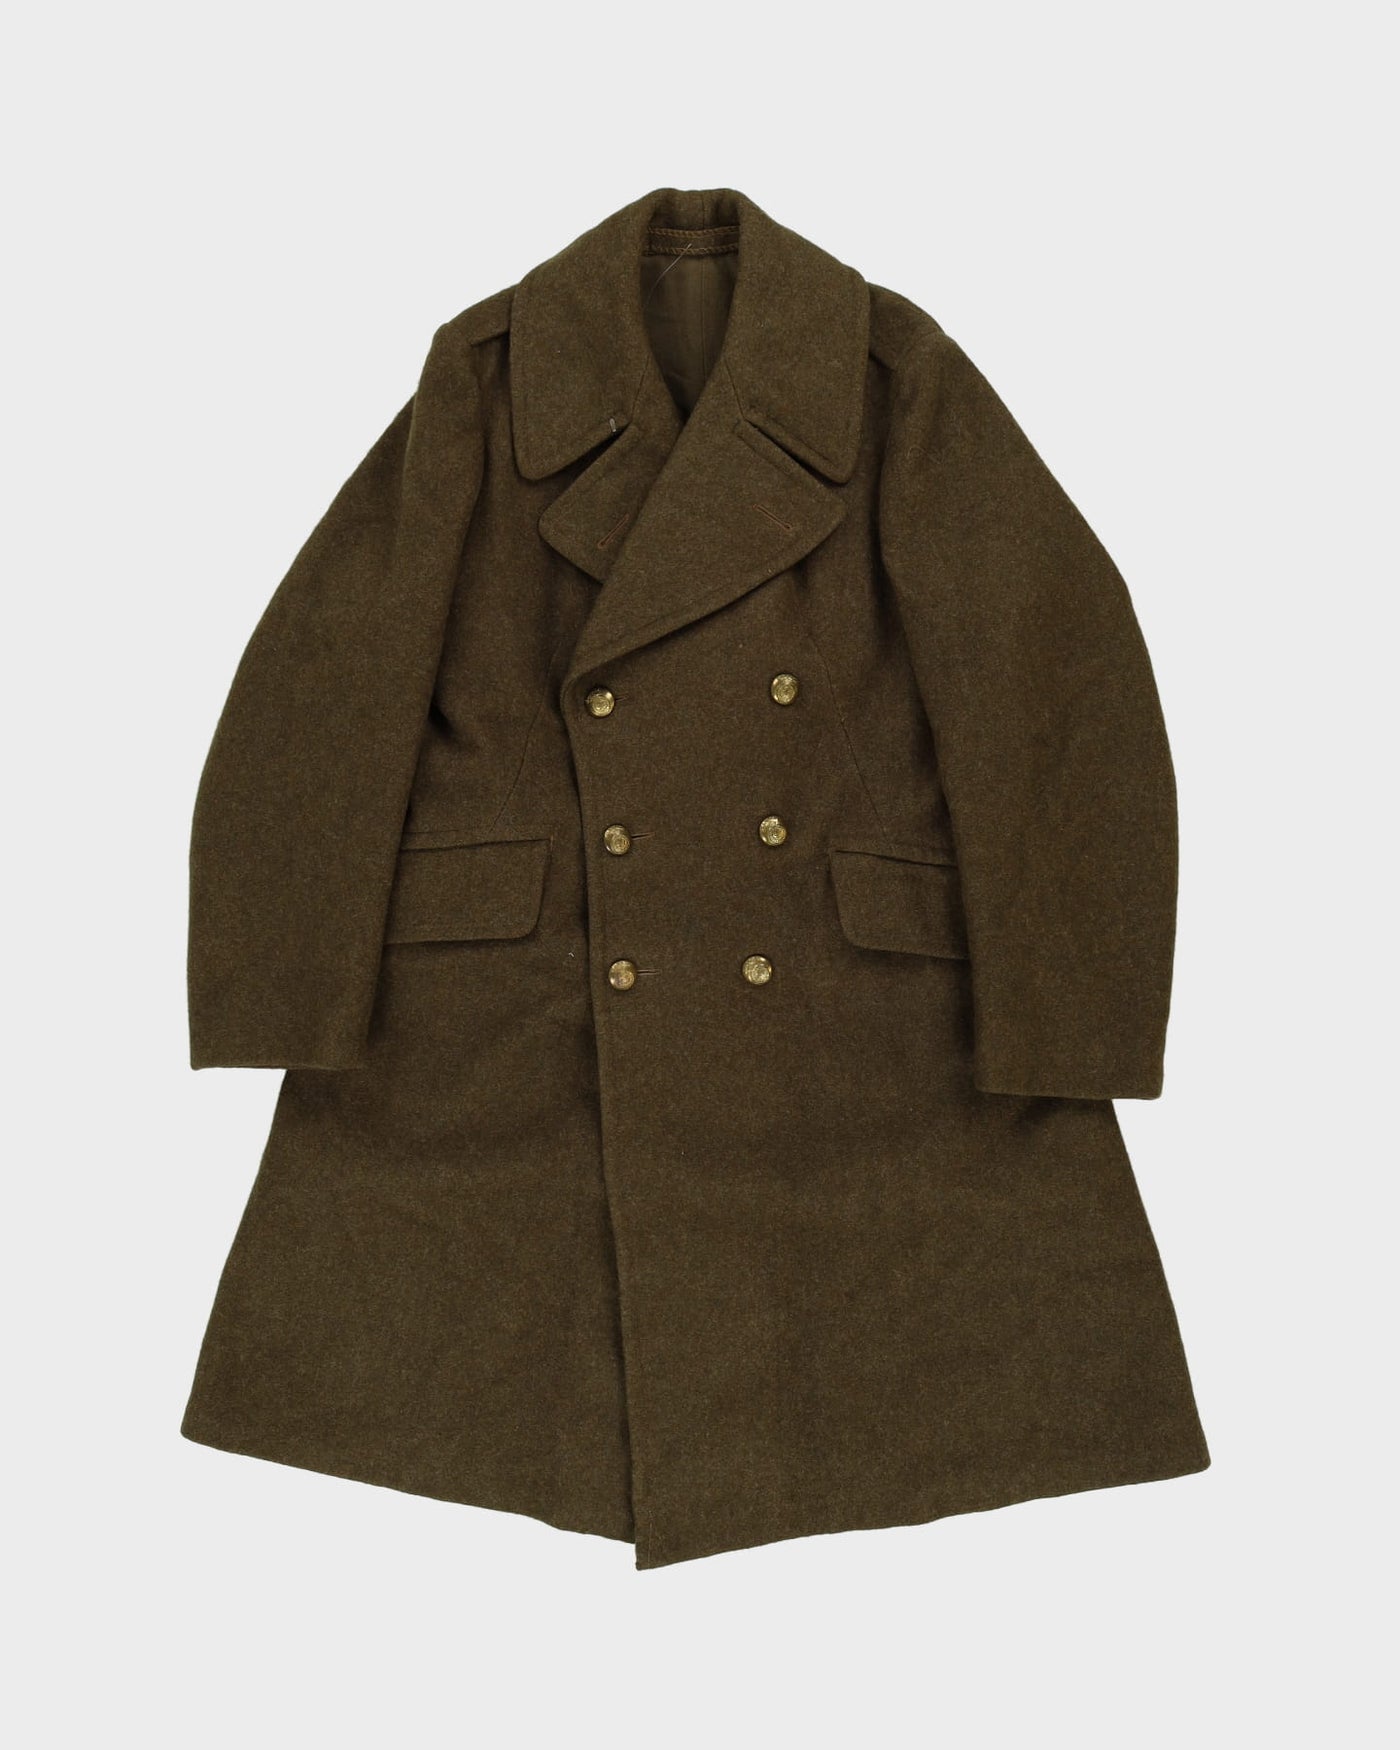 Stunning 1940 Dated Canadian Army OD Green Wool Greatcoat - Medium